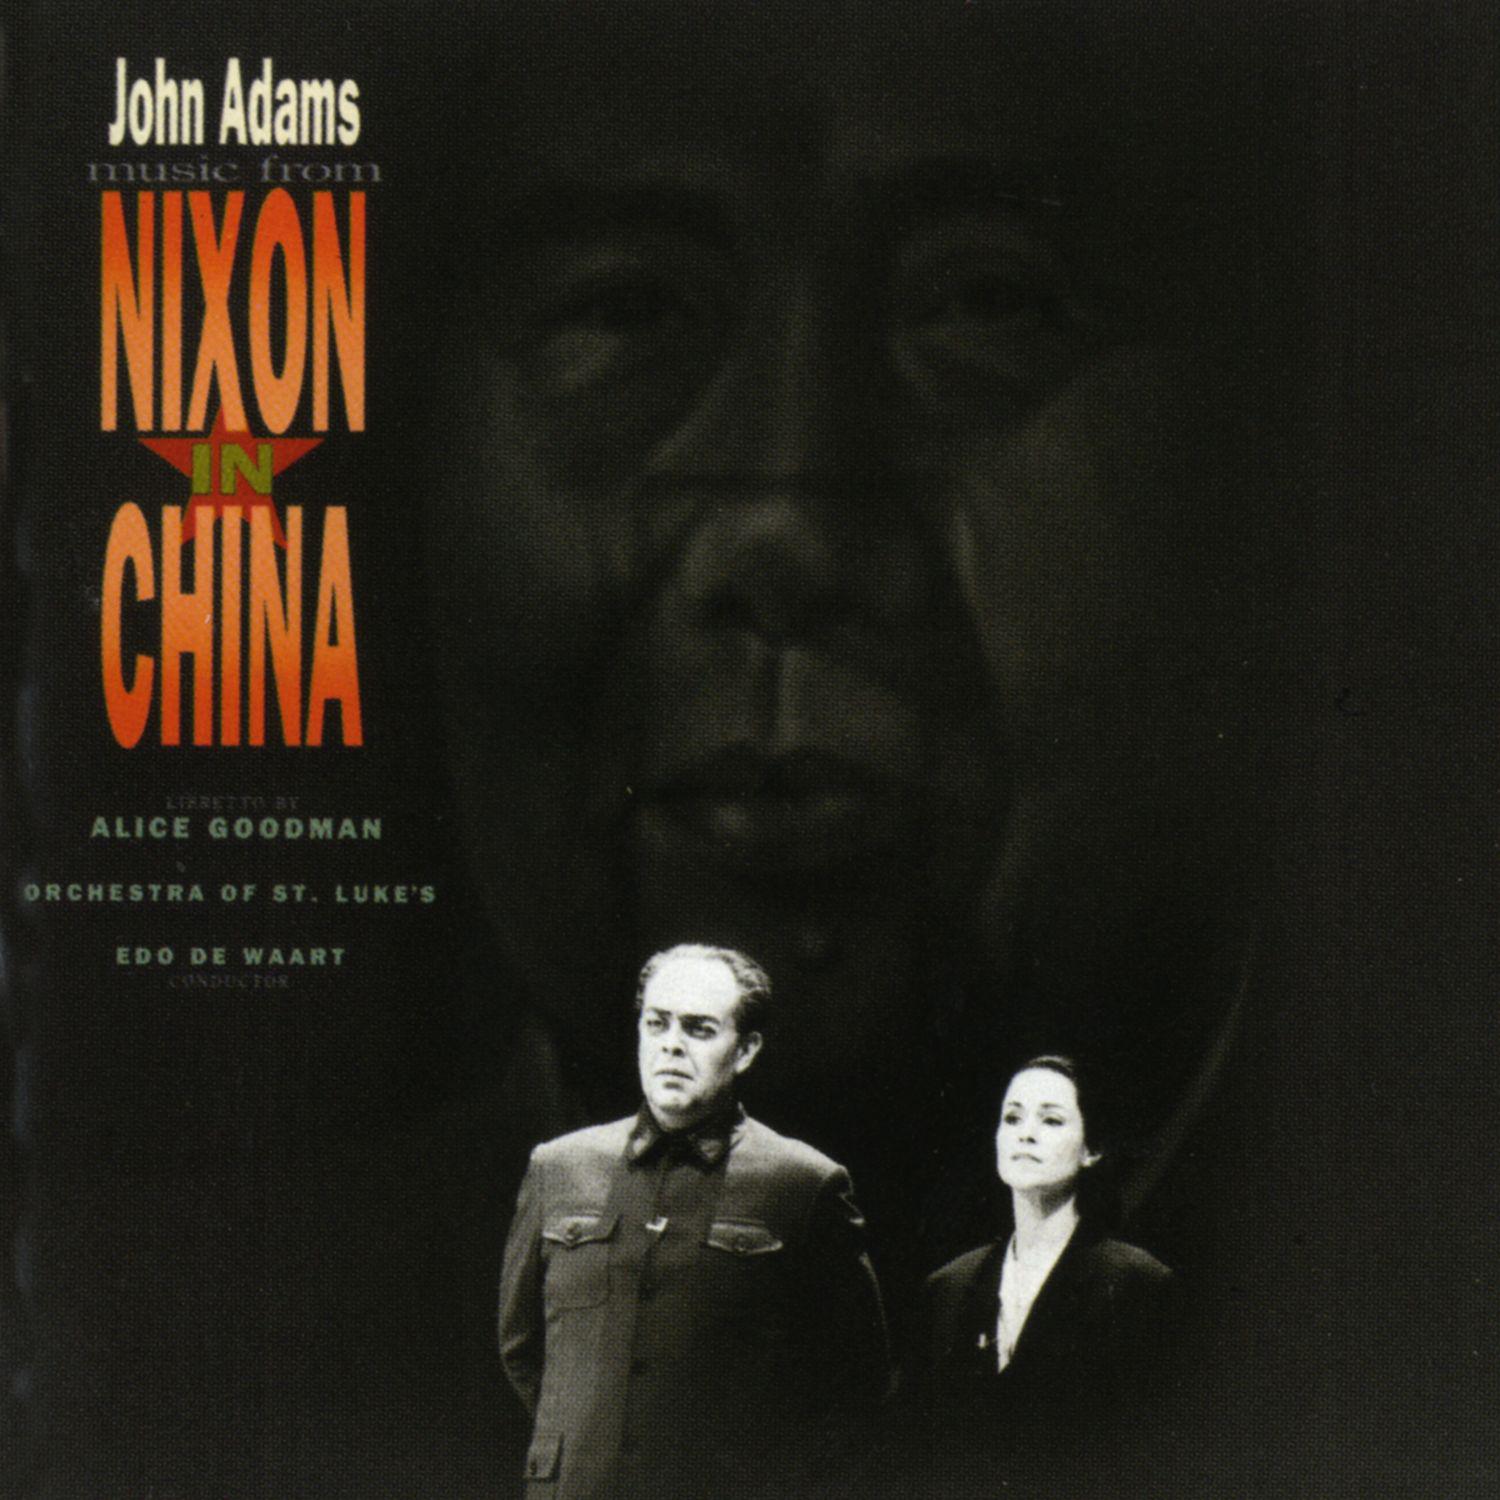 Nixon in China, Act I, Scene 1:"Your Flight Was Smooth, I Hope?"